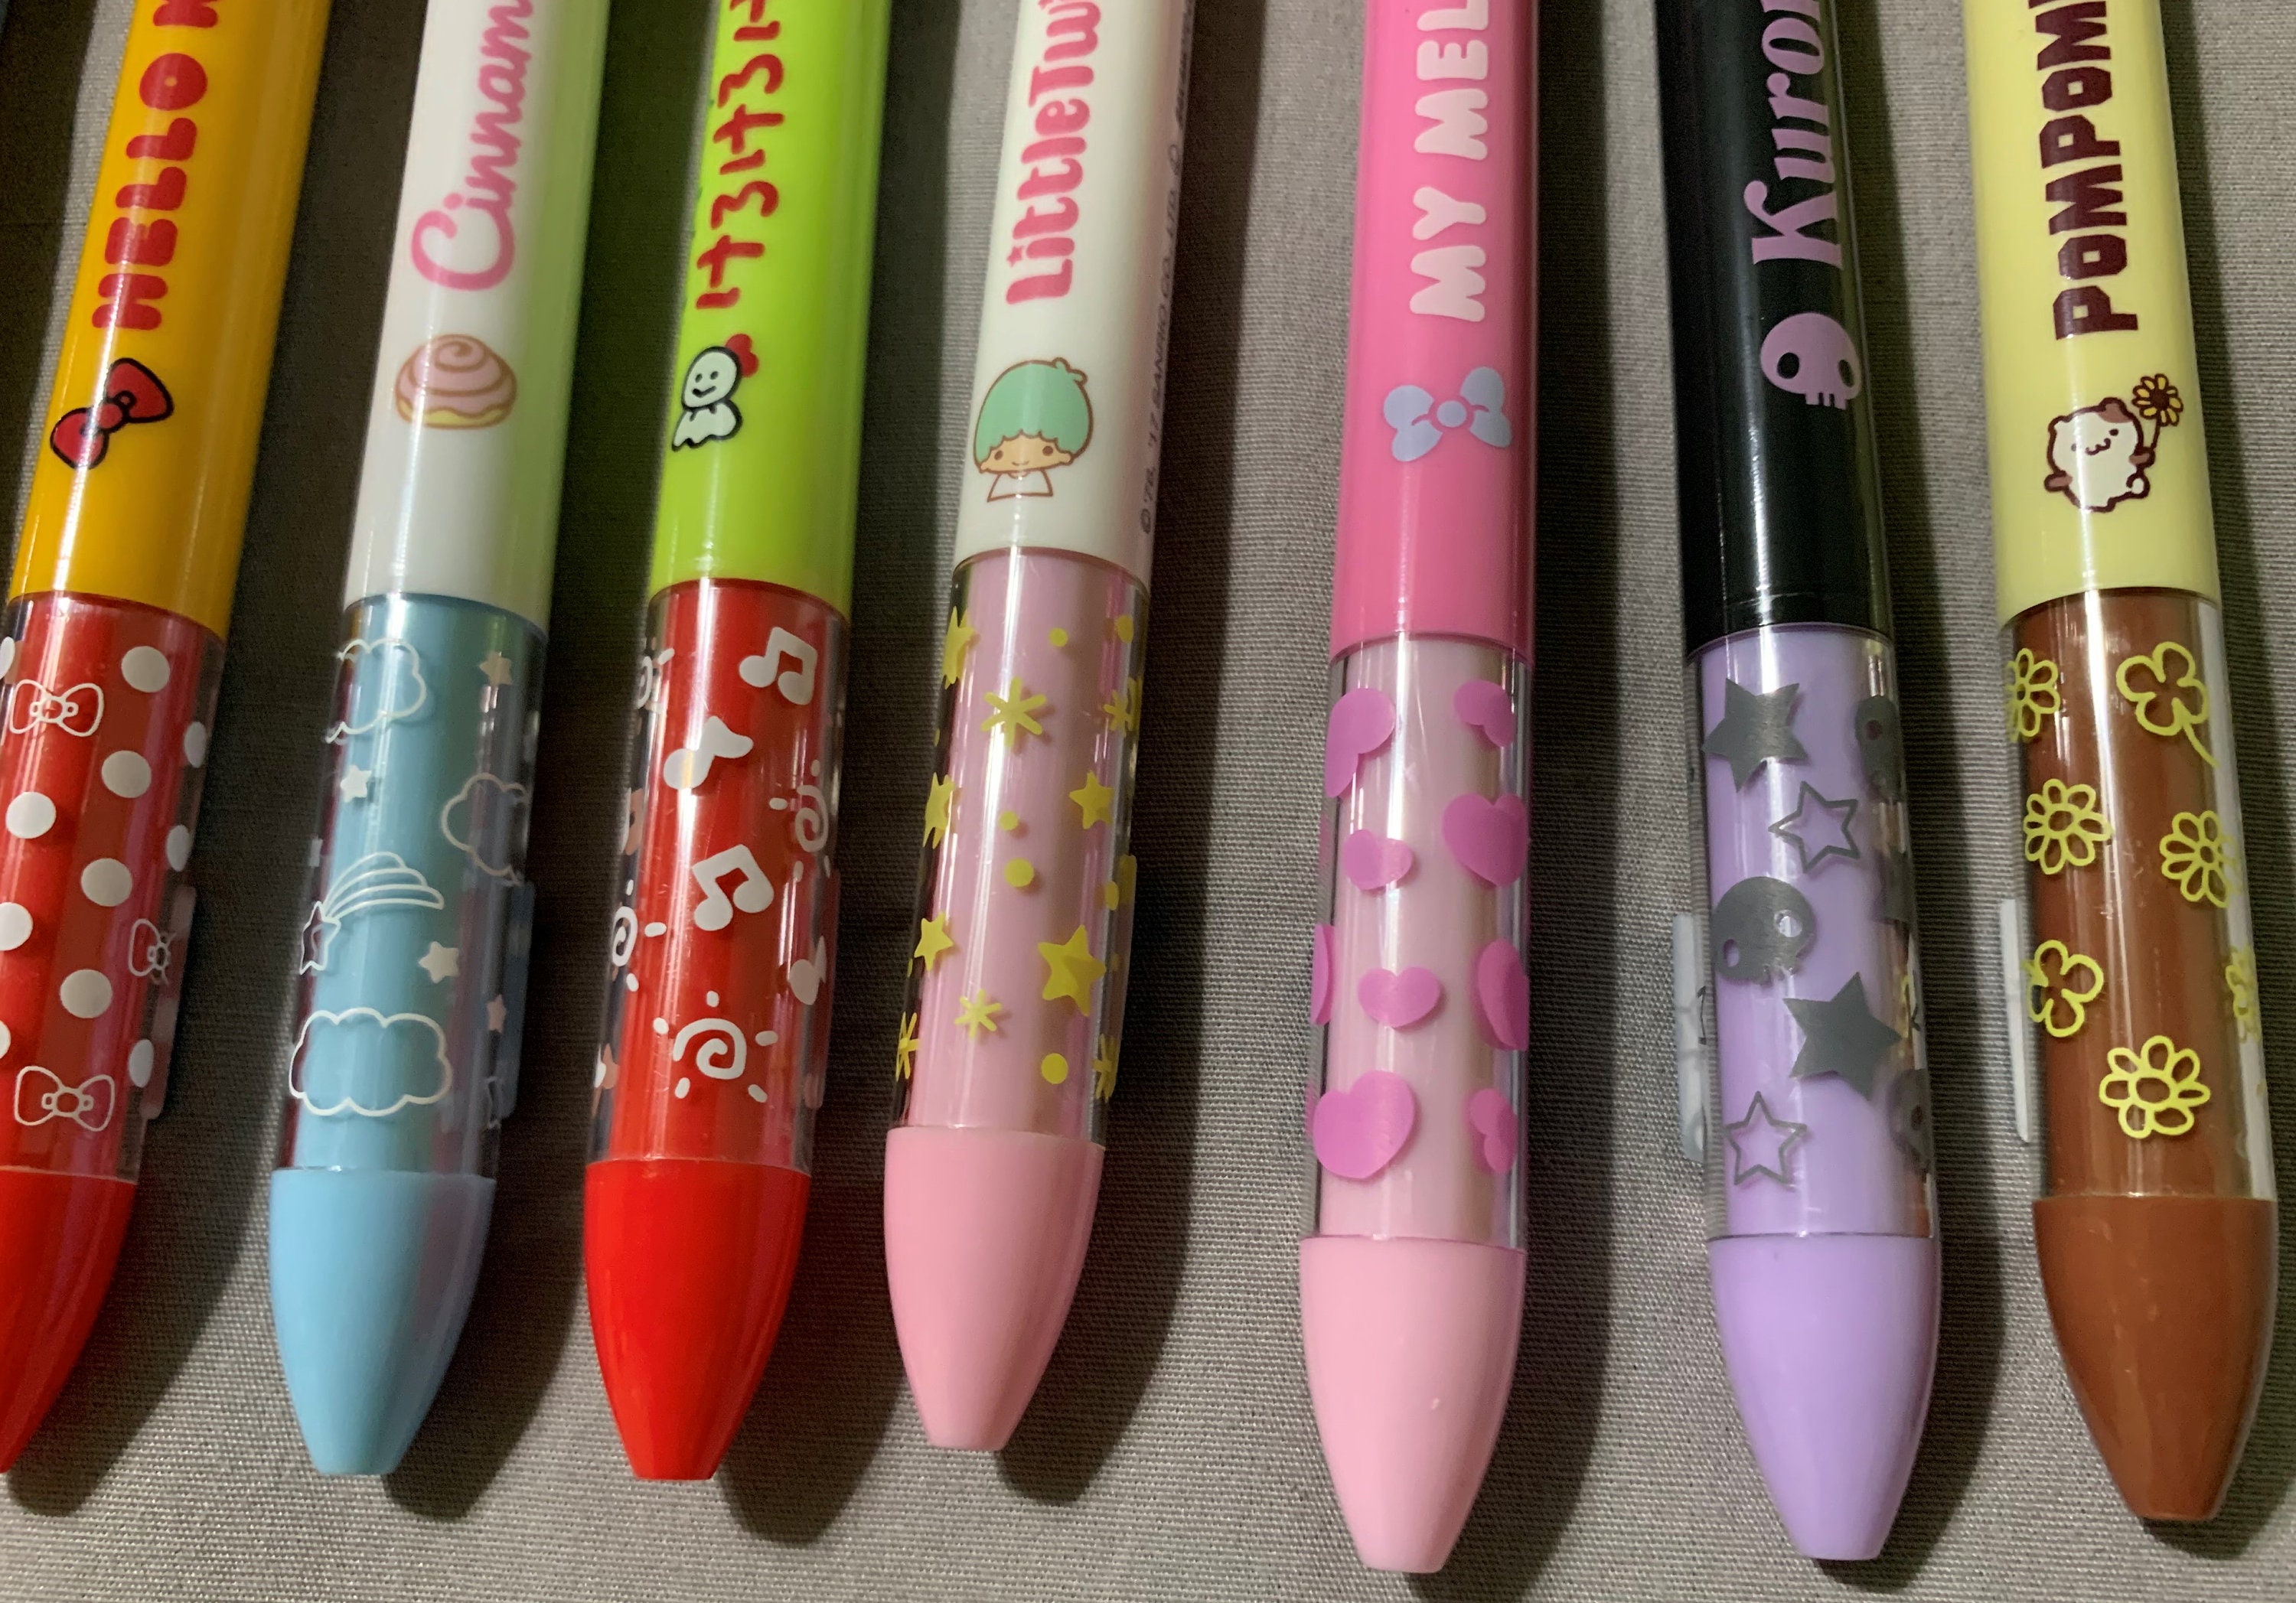 2in1 Hello Kitty Pens Blue Red Ink Sanrio Cute 2 Colors Bow Ribbon Design  Gift 